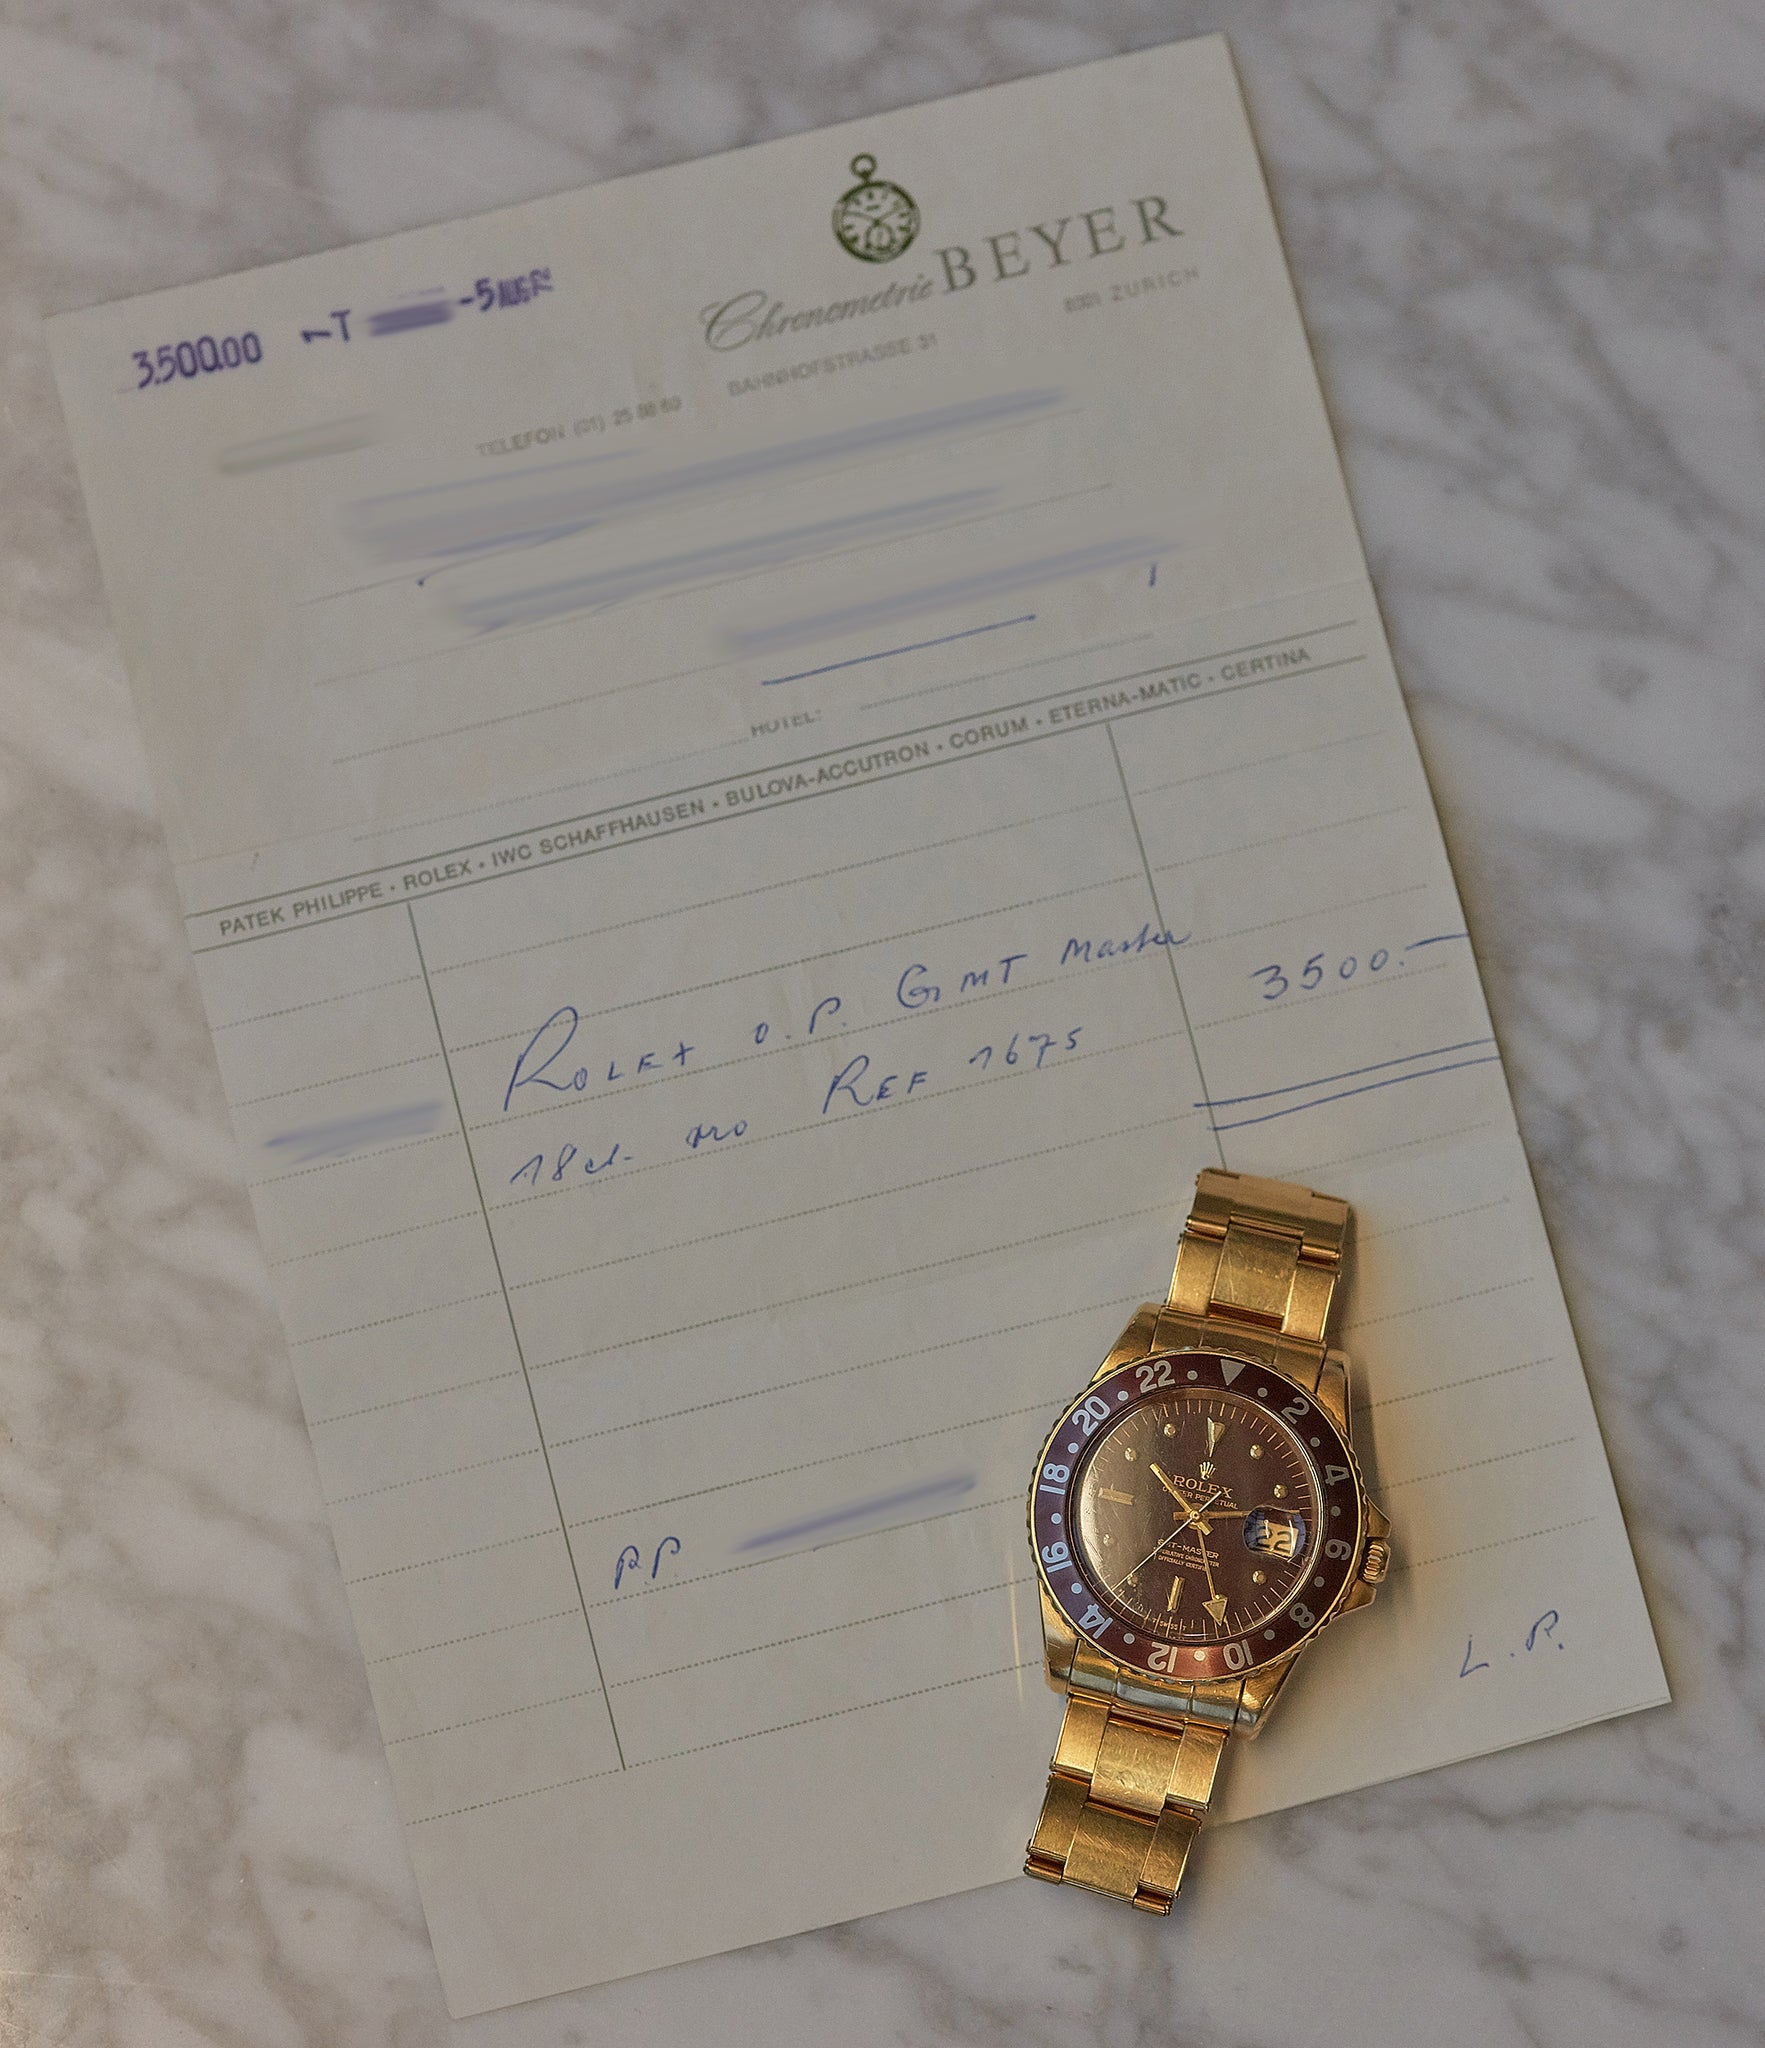 original purchase receipt 1675/8 Rolex GMT-Master Concorde yellow gold watch full set for sale online at A Collected Man London UK specialist of rare watches